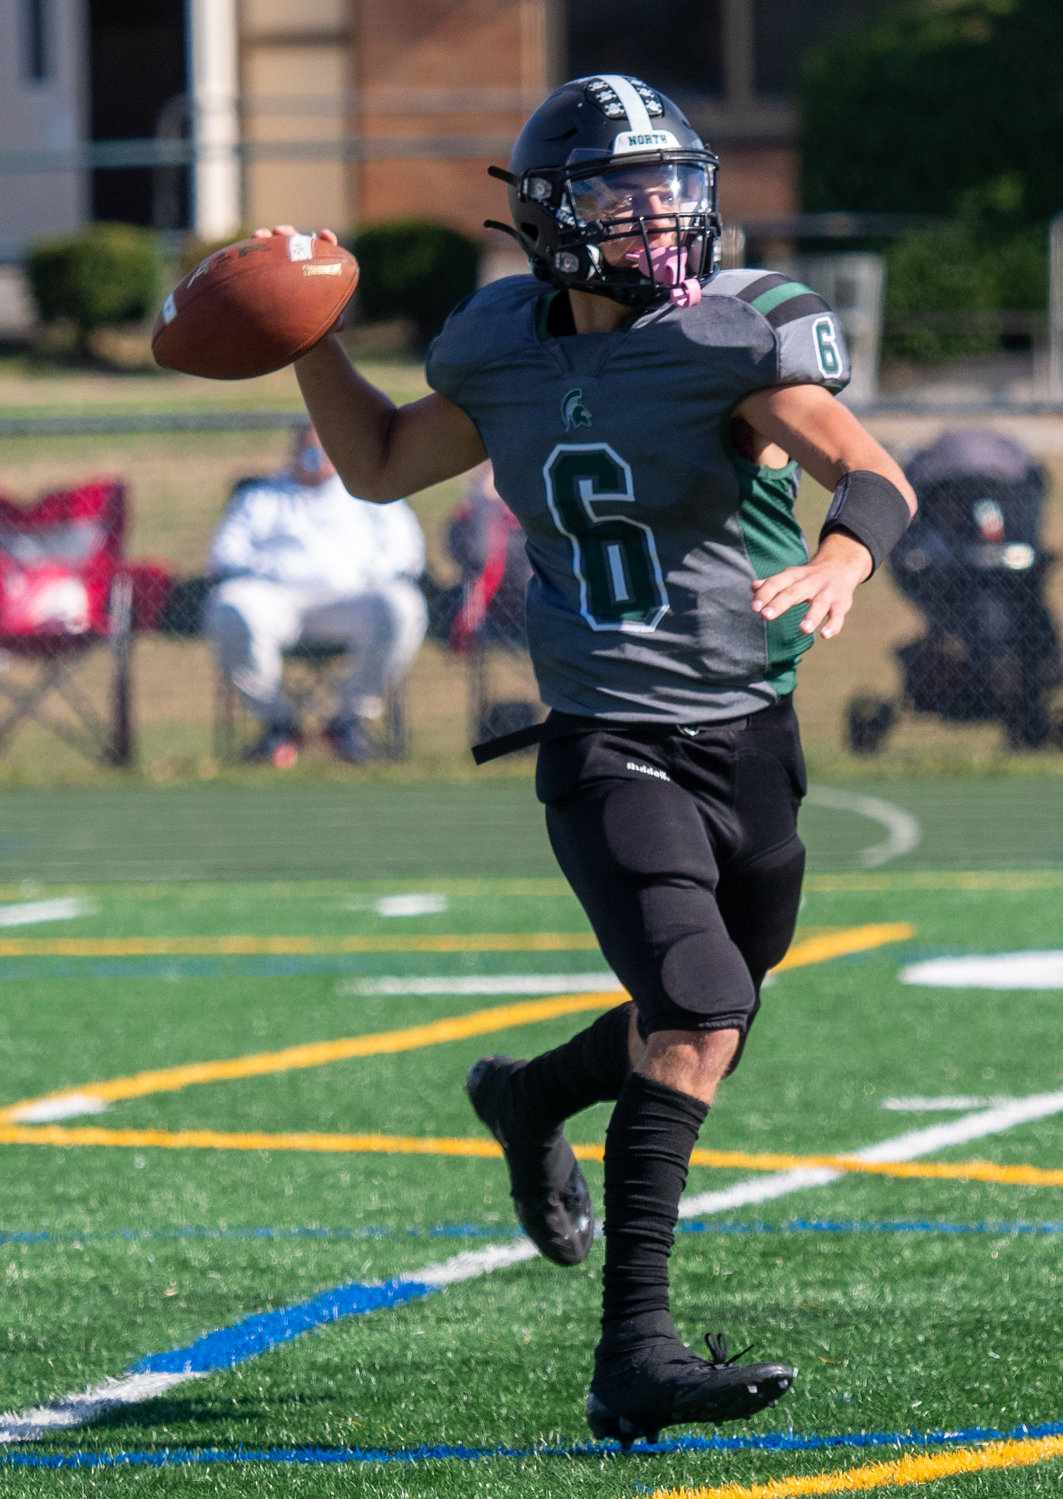 Senior quarterback Nick Naumov had a touchdown run and 156 yards passing as the Spartans improved to 2-3 on the season.